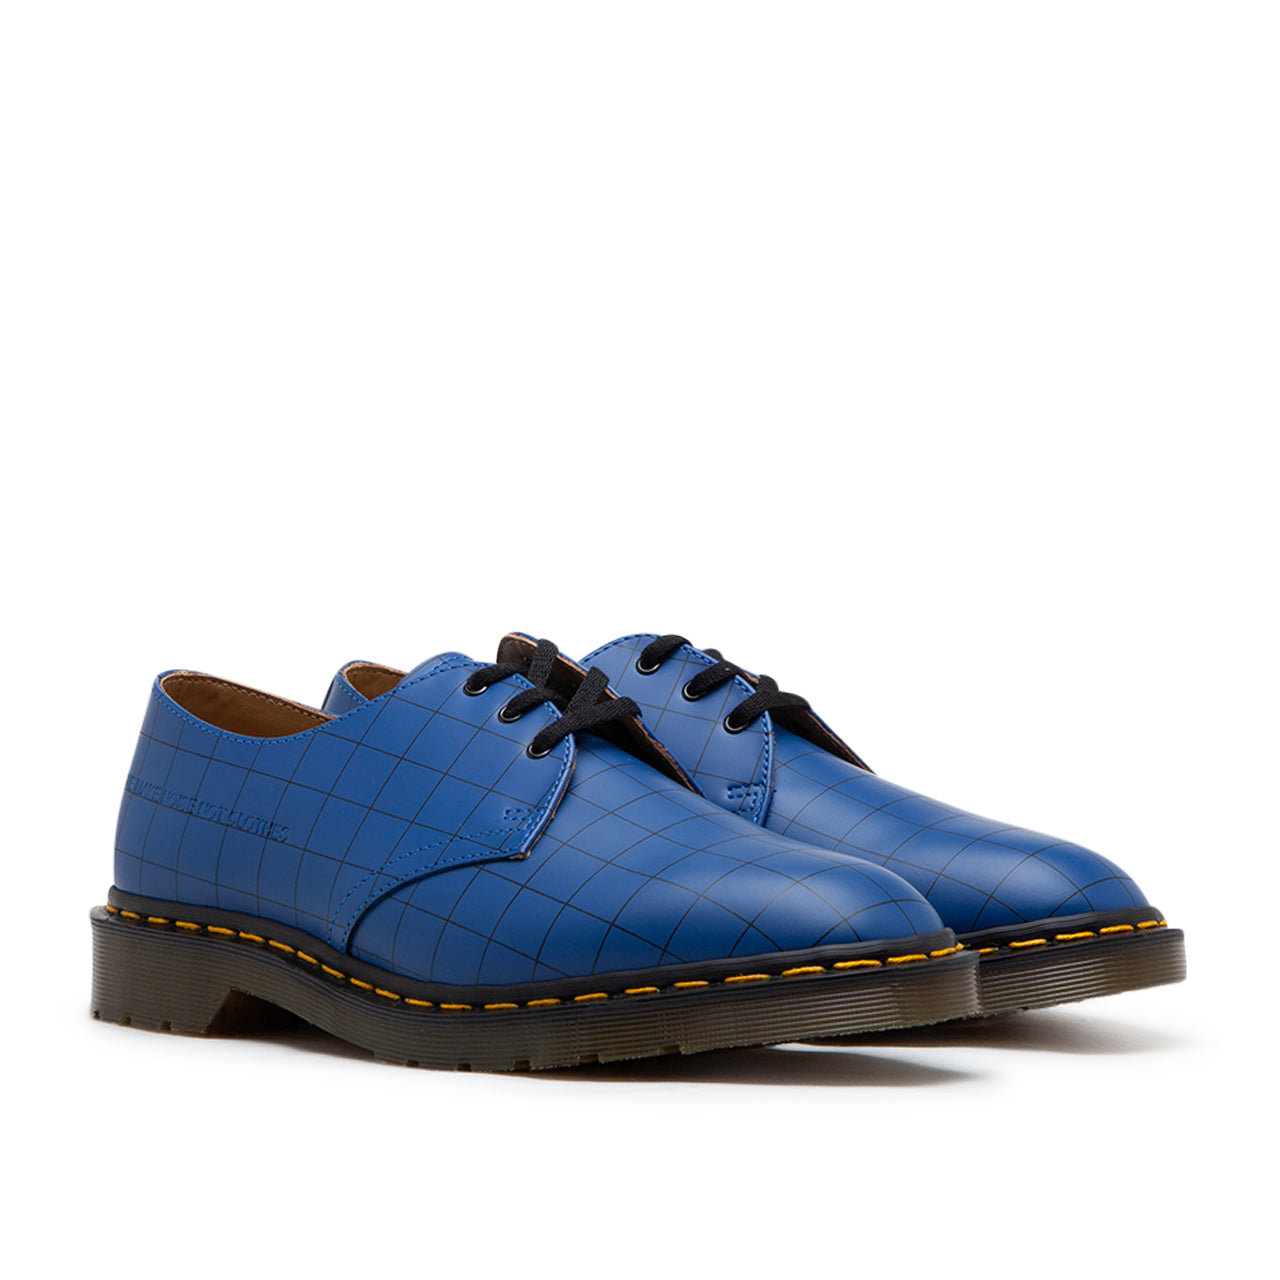 Dr. Martens x Undercover 1461 Check Smooth (Blau)  - Allike Store